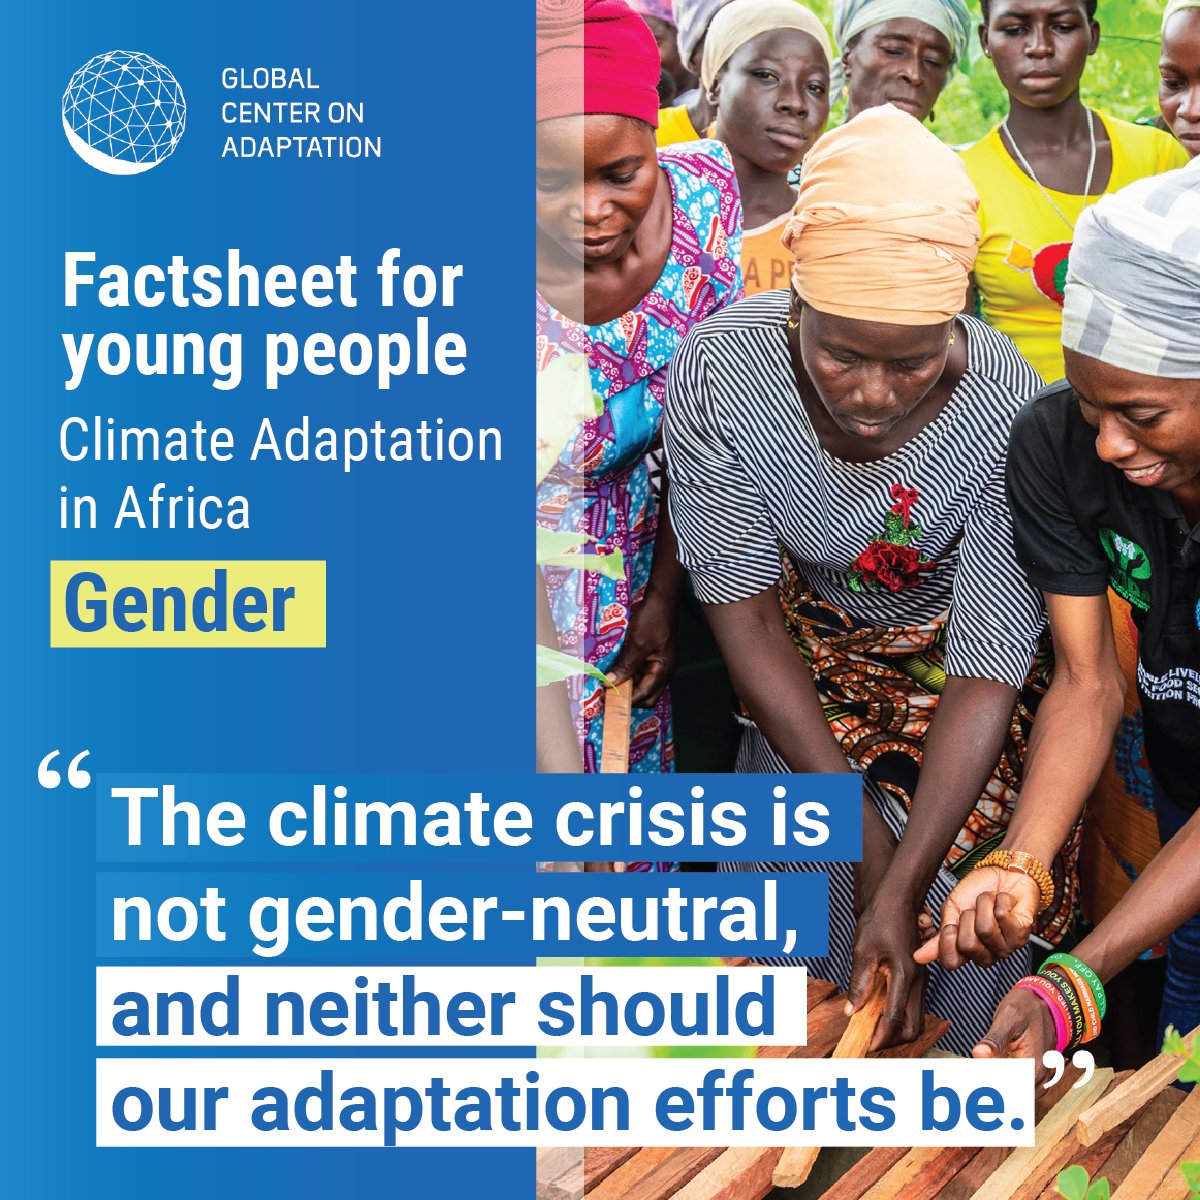 Women and men experience different levels of exposure, vulnerability and resilience to climate risk and climate change impacts due to differences in rights, responsibilities, and opportunities. Find out more gca.org/reports/https-…